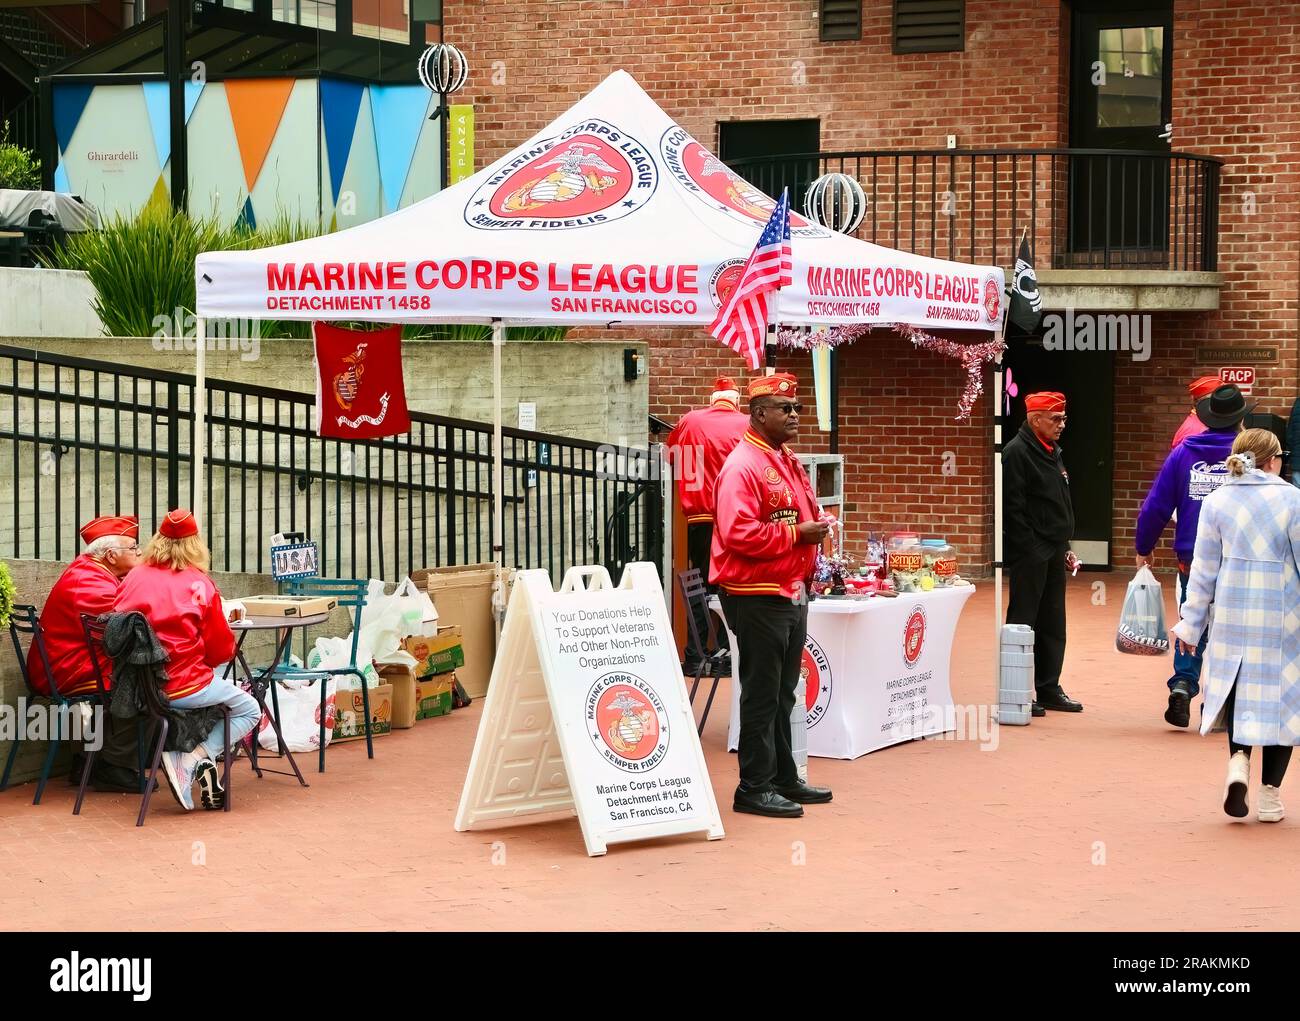 Fund raising stand manned by veterans from the Marine Corps League Detachment 1458 in Ghirardelli Square Marina District San Francisco California USA Stock Photo